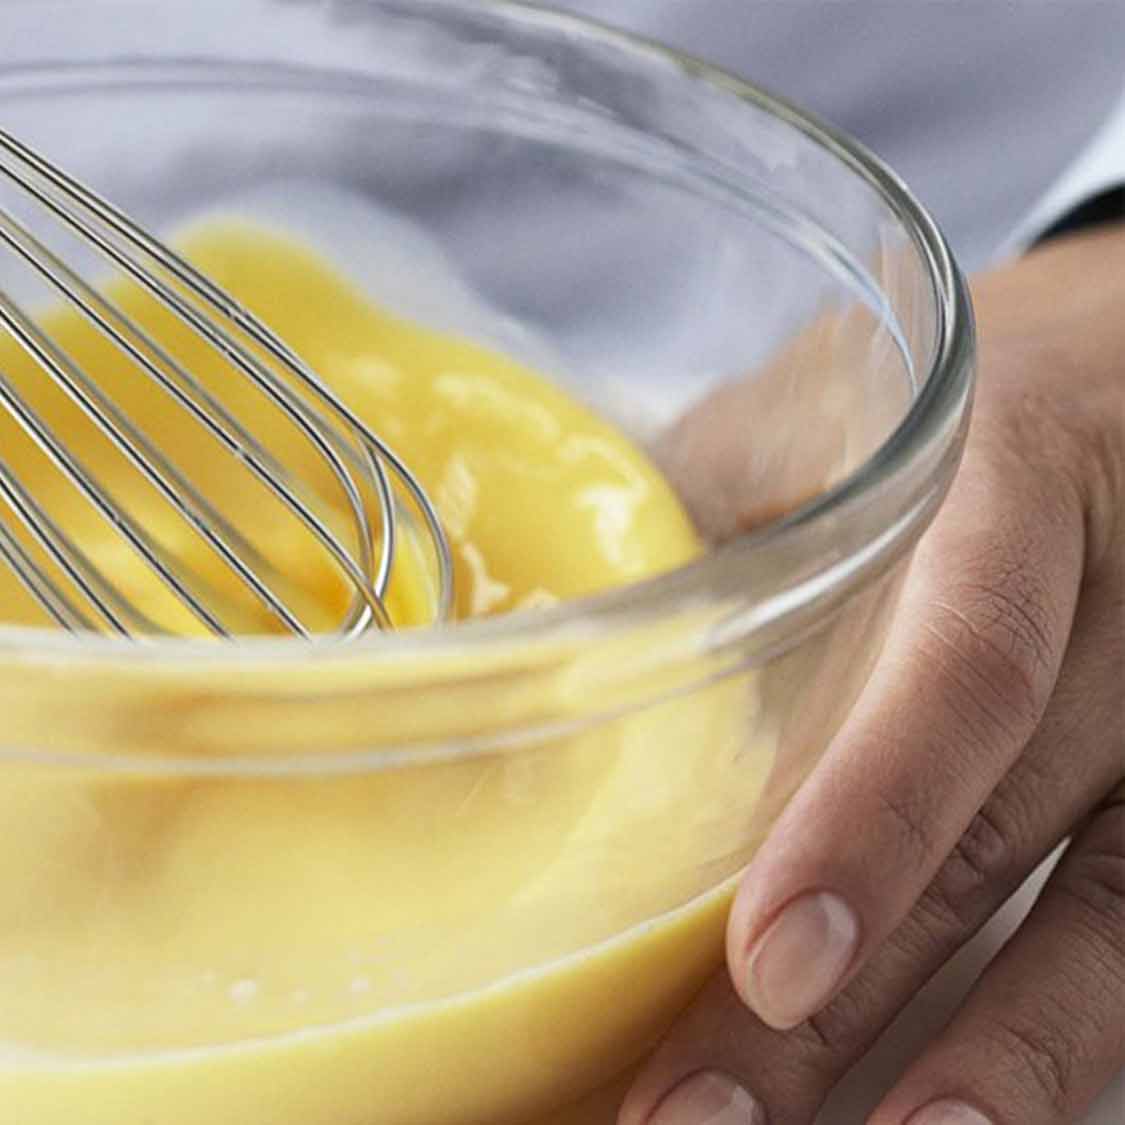 whisking eggs in a bowl